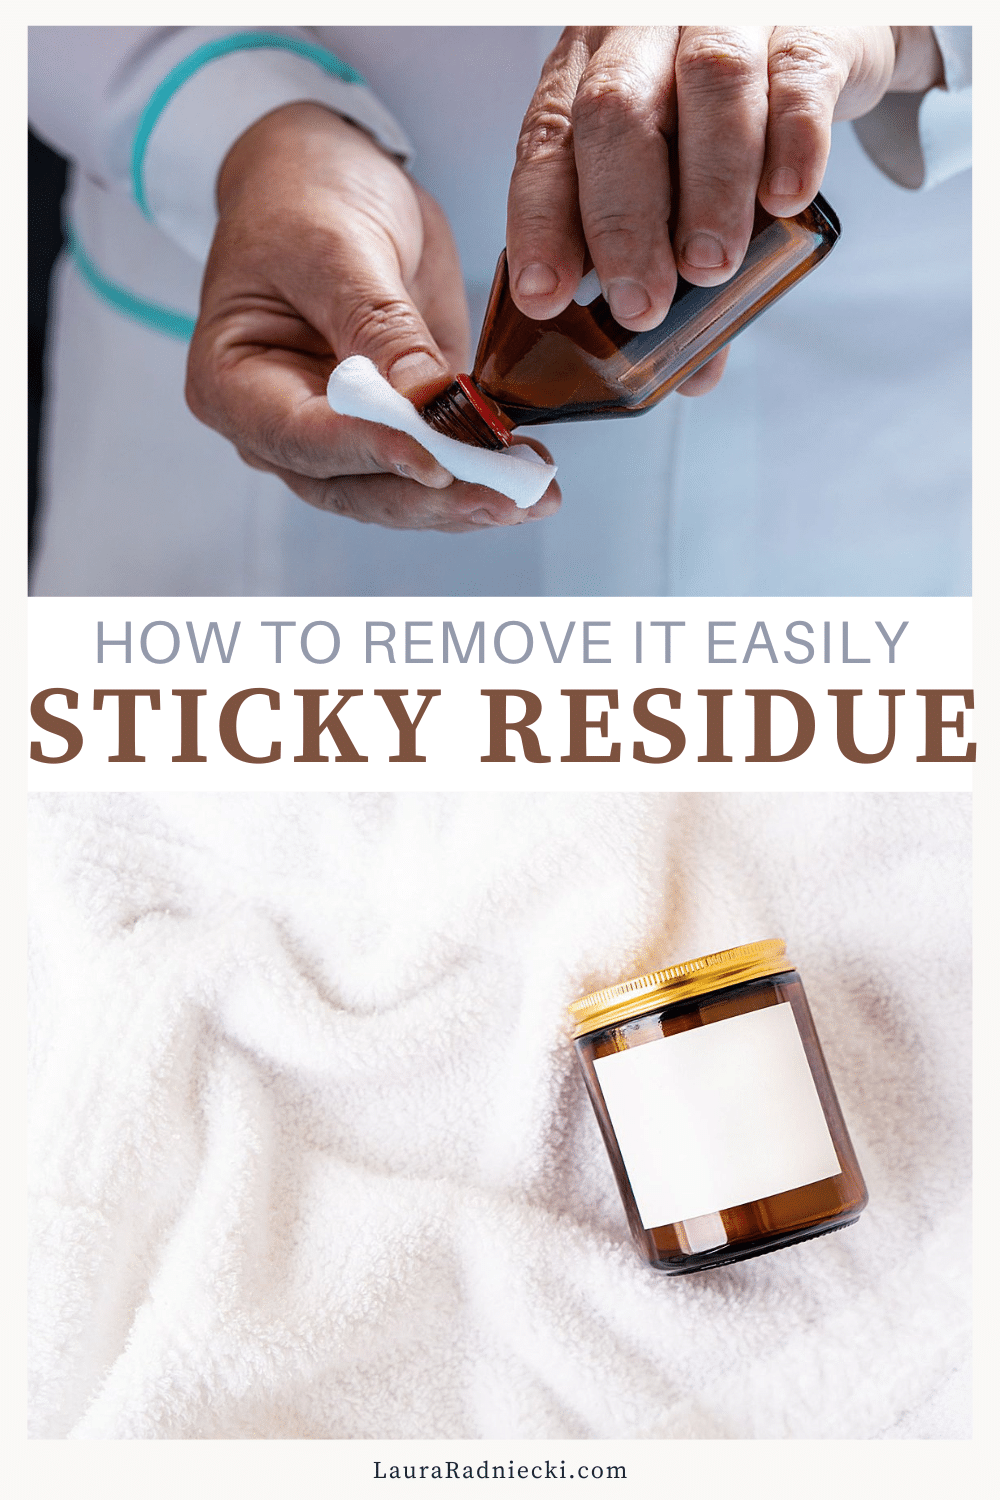 How to get Sticky Residue Off Wood, Glass, and Plastic